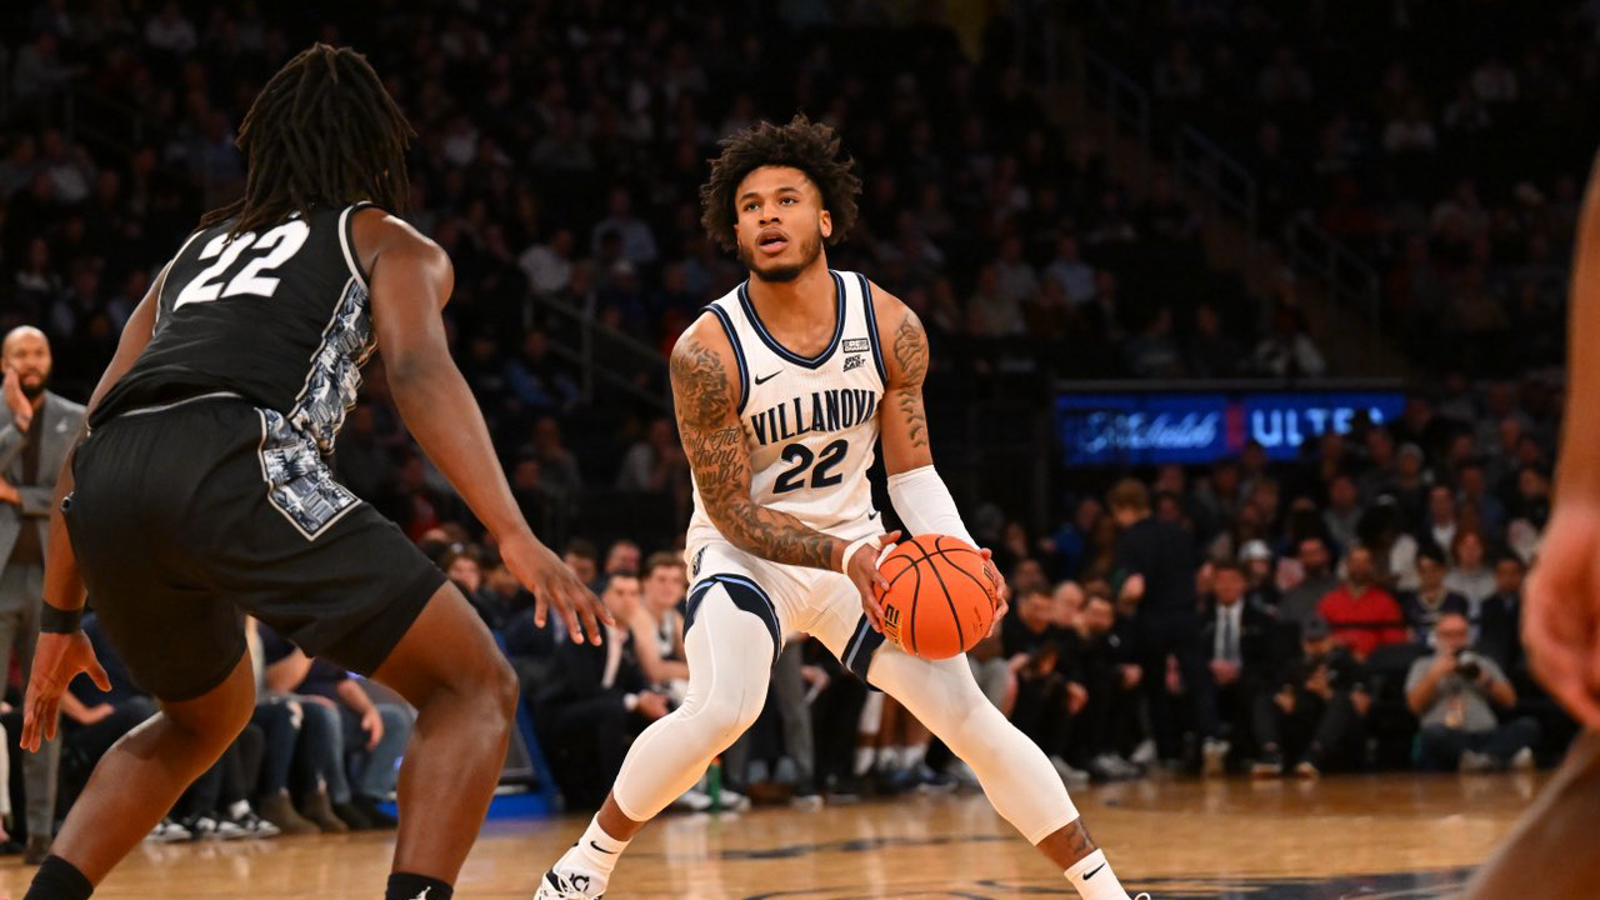 Cam Whitmore leads Villanova to a victory over Georgetown